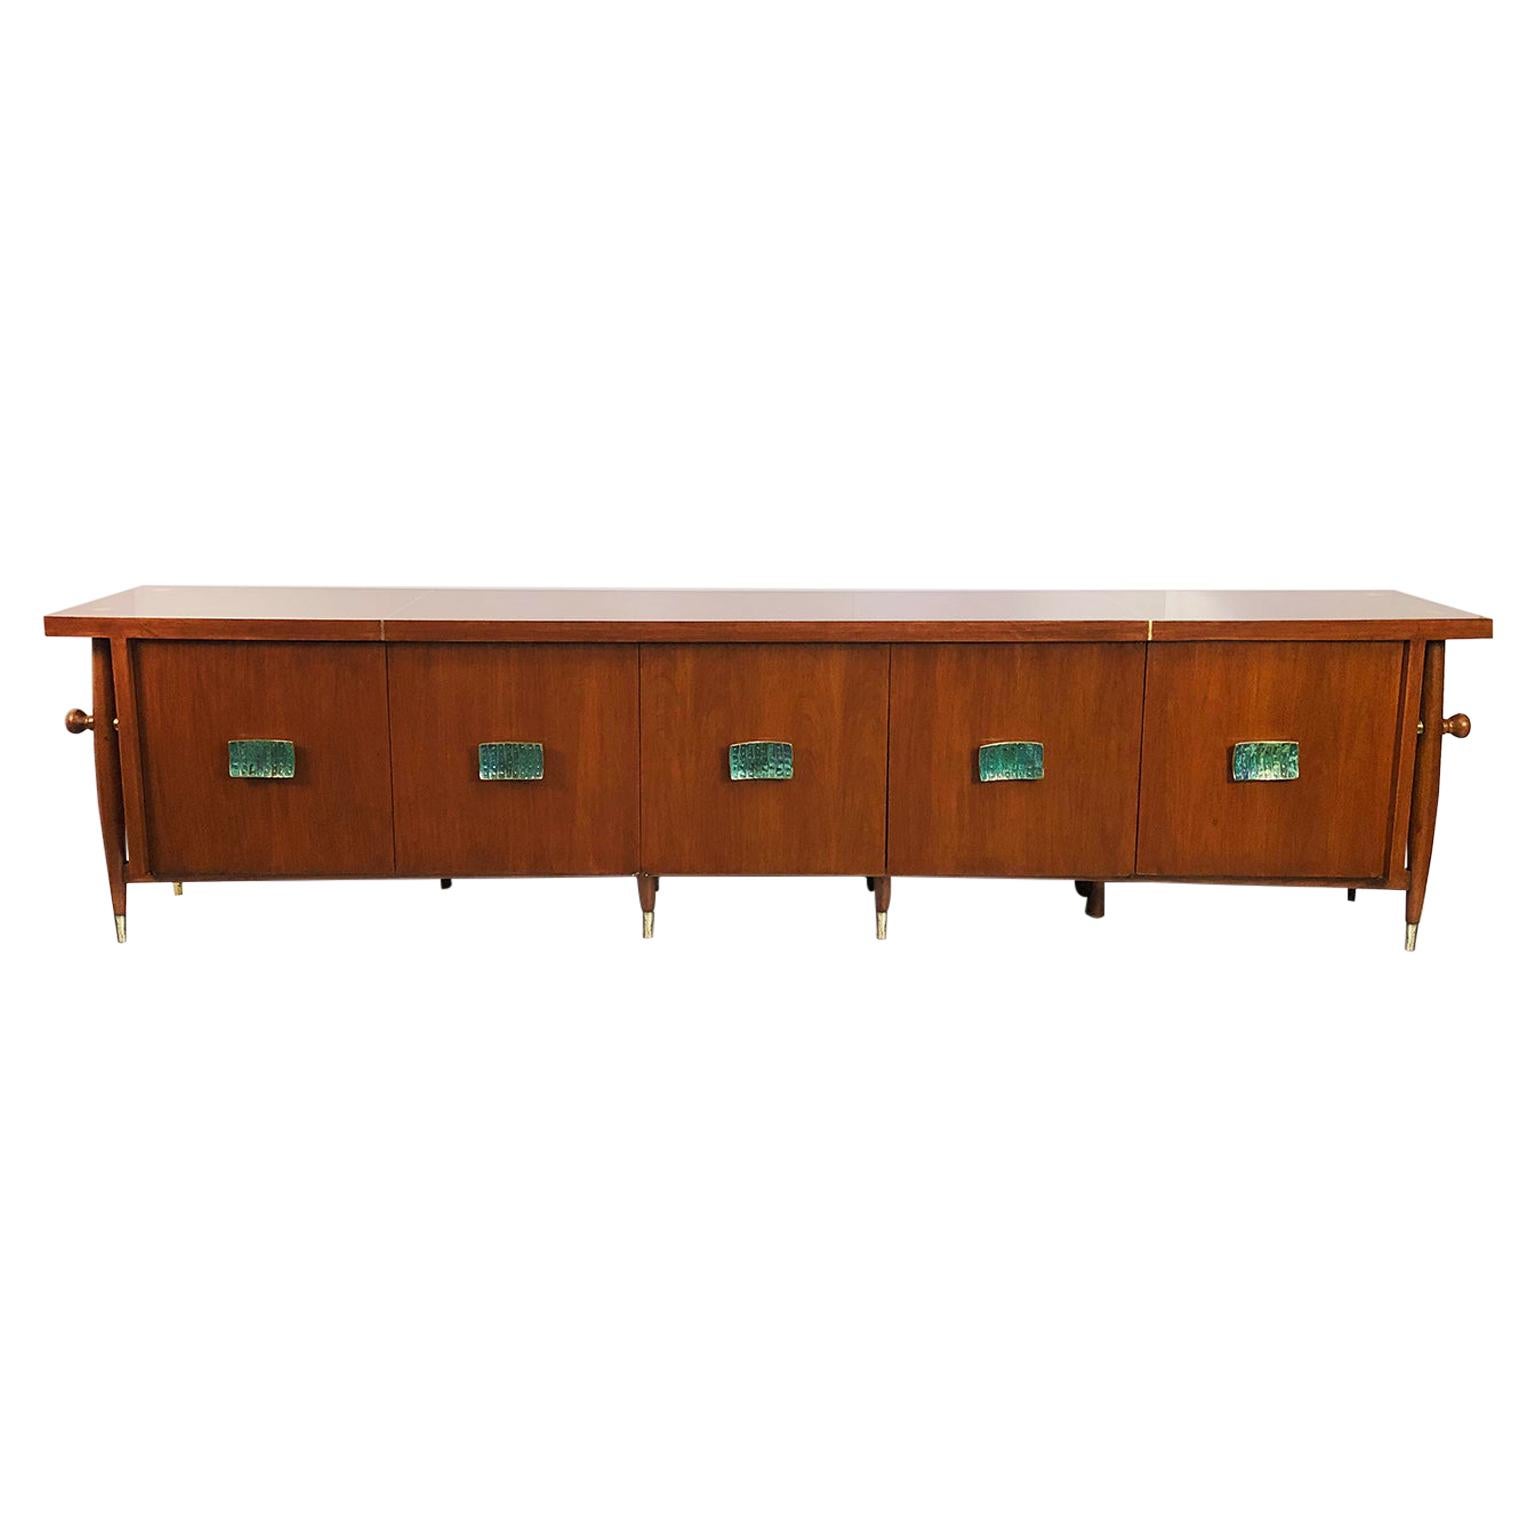 Stunning Frank Kyle Credenza with Pepe Mendoza Pulls